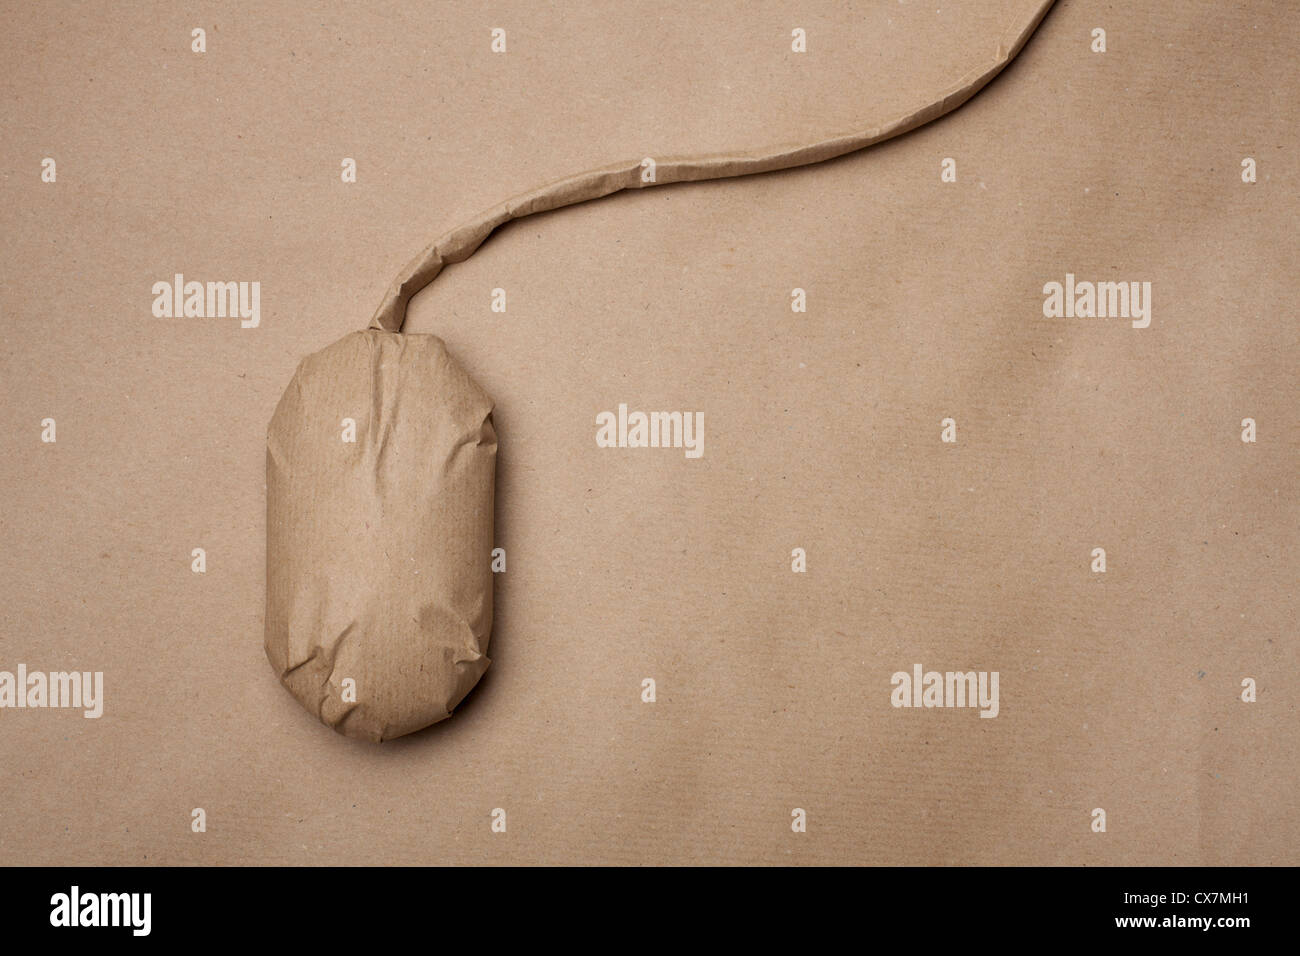 A computer mouse wrapped in brown paper Stock Photo